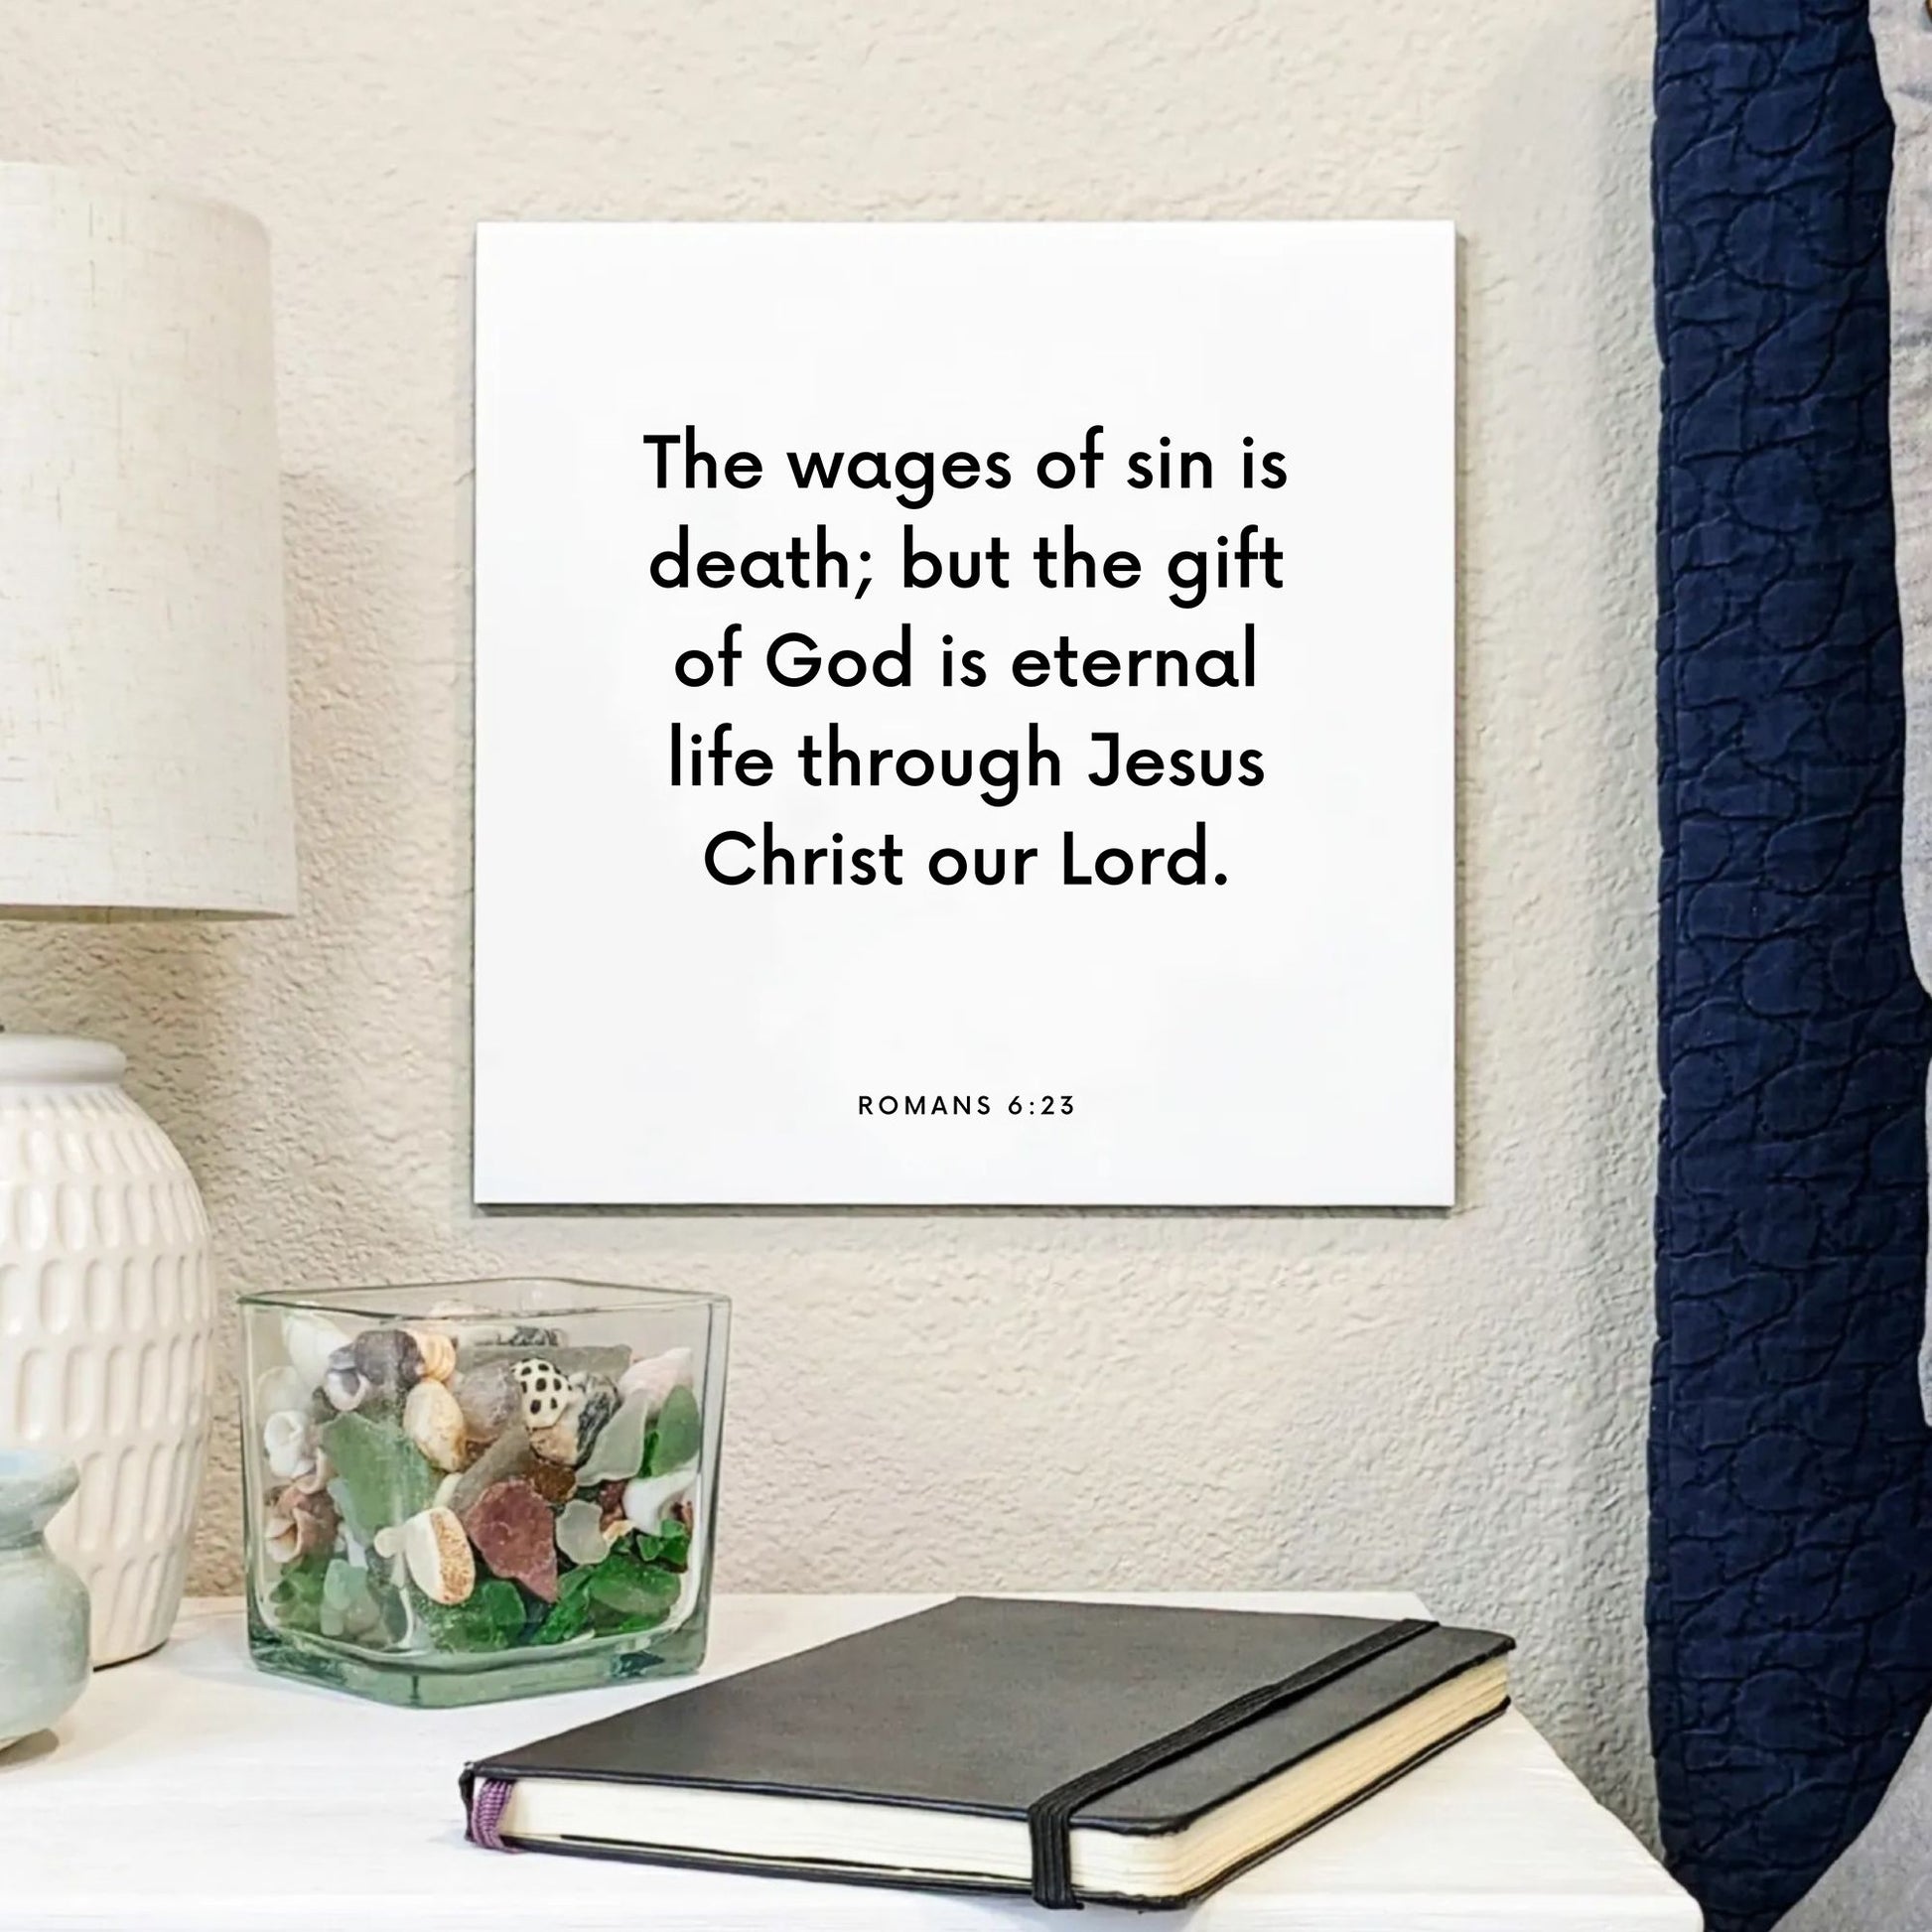 Bedside mouting of the scripture tile for Romans 6:23 - "The wages of sin is death but the gift of God is eternal life"